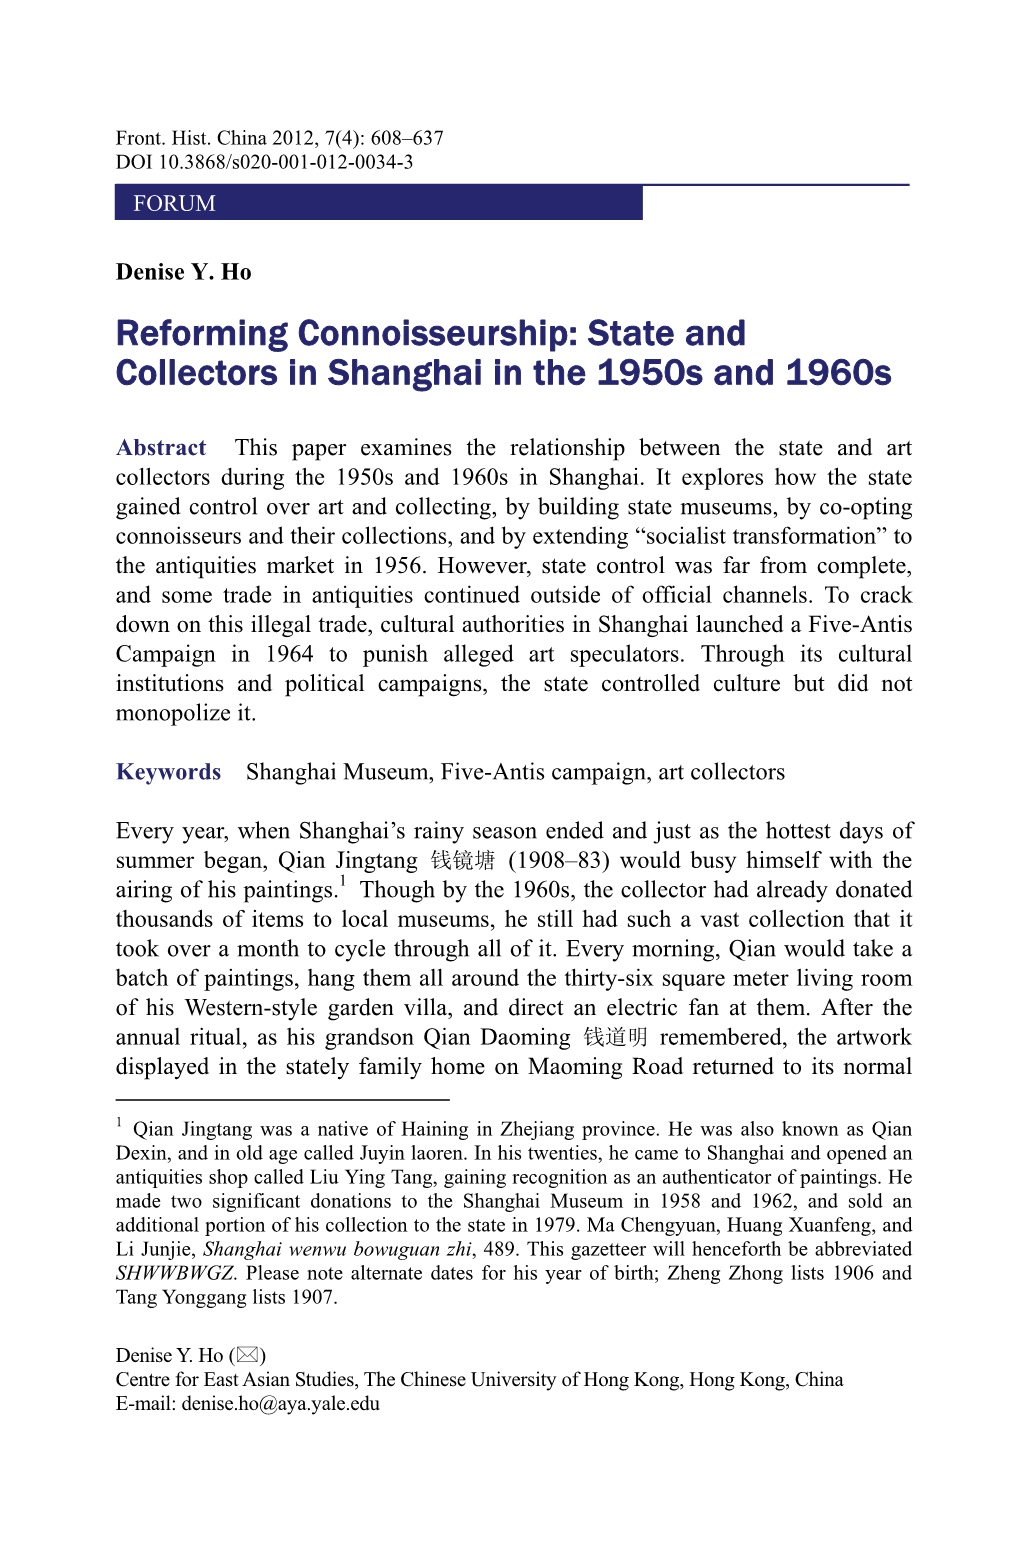 Reforming Connoisseurship: State and Collectors in Shanghai in the 1950S and 1960S